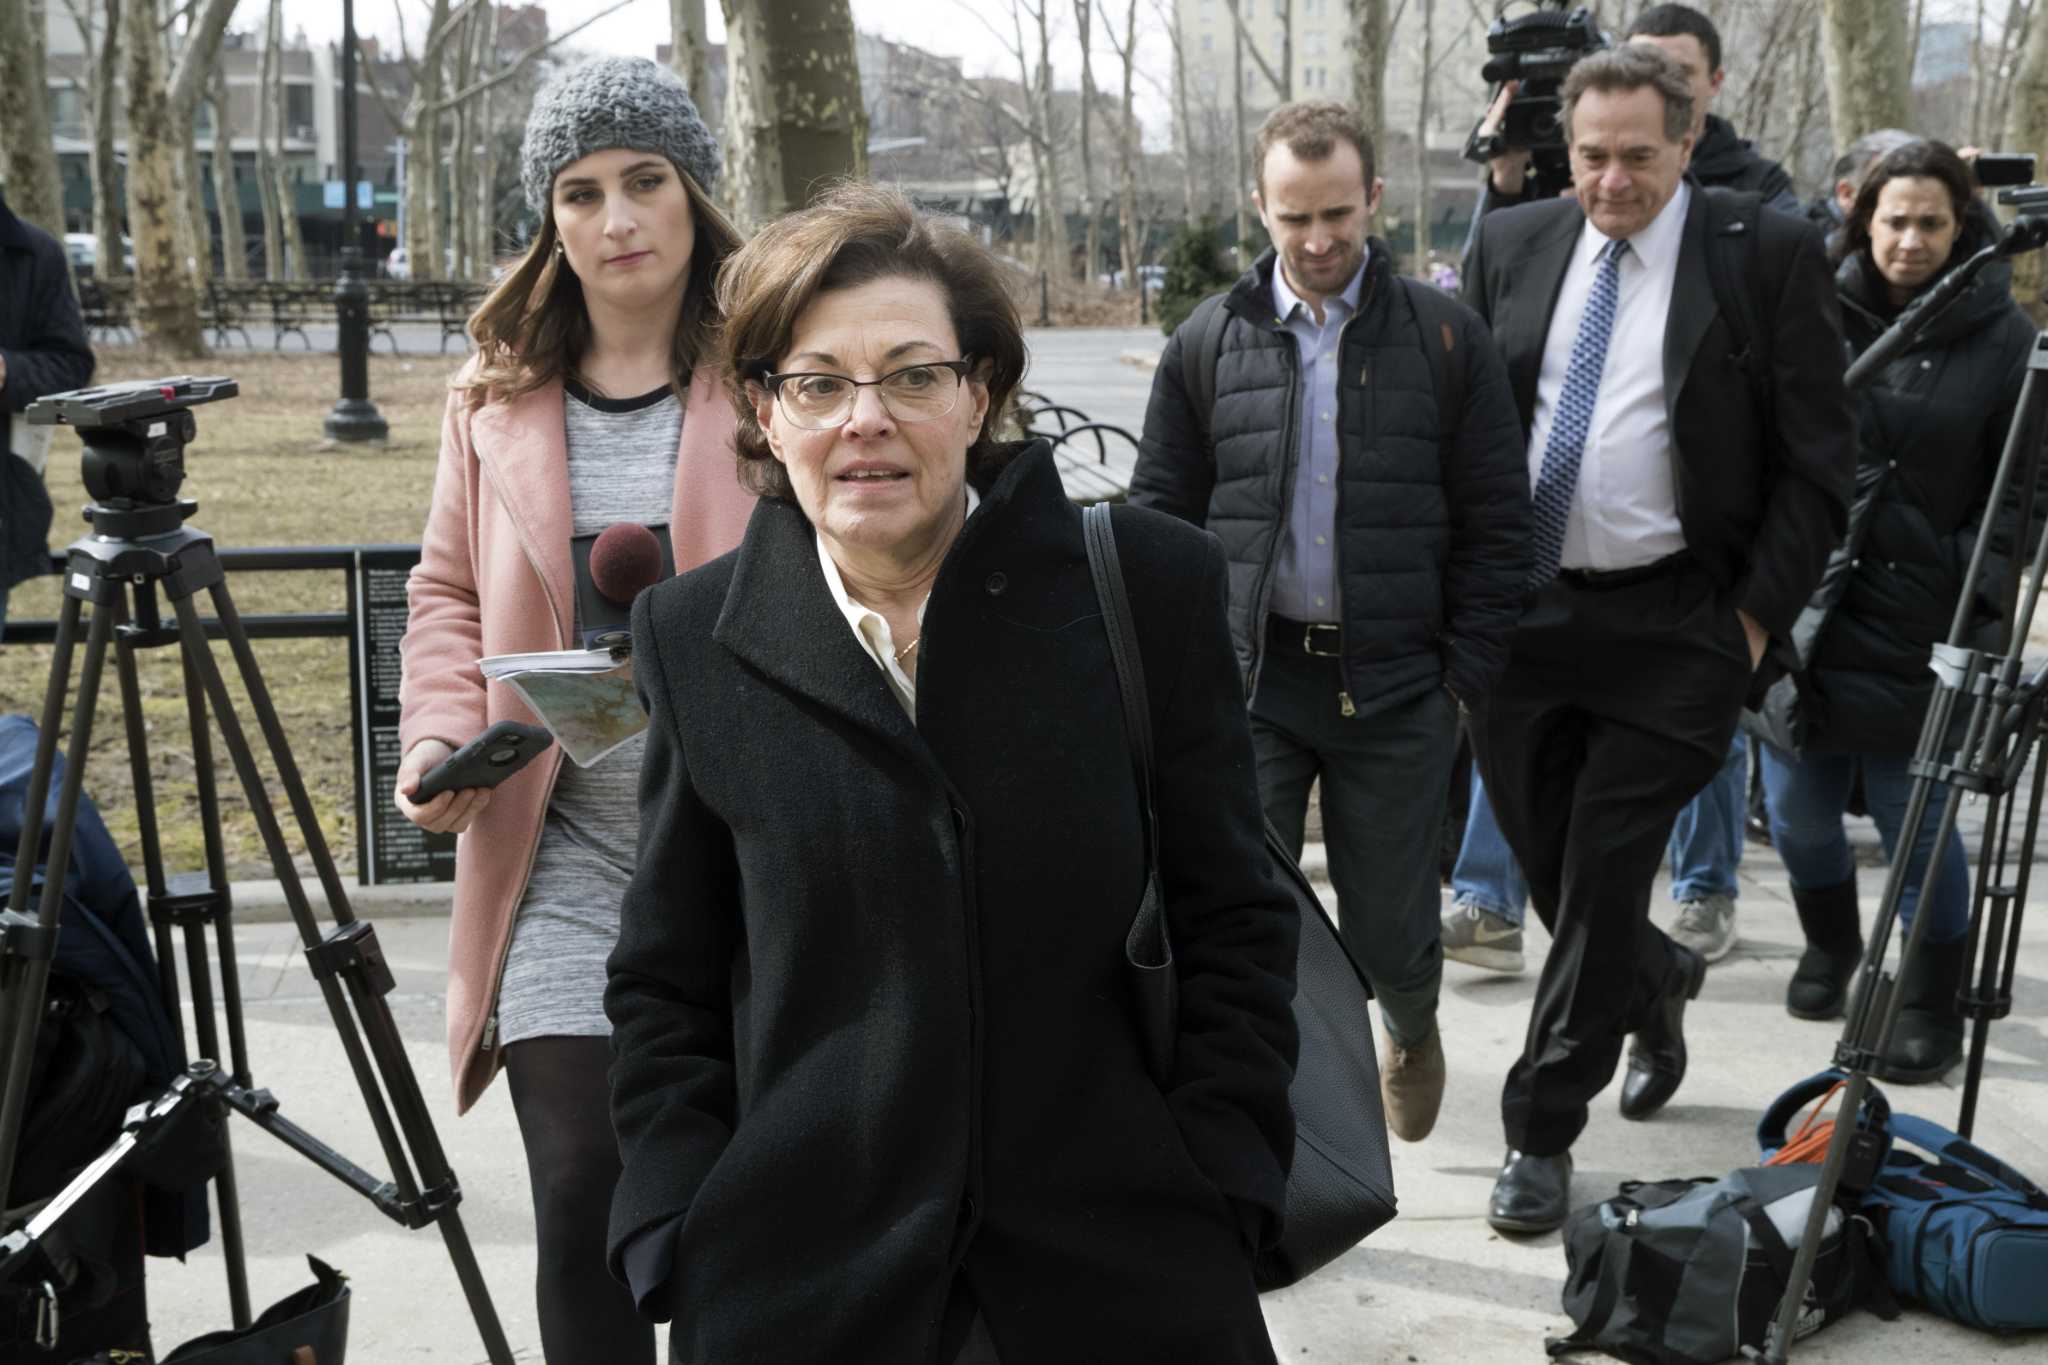 Second season of HBO's 'The Vow' tracks NXIVM's downfall